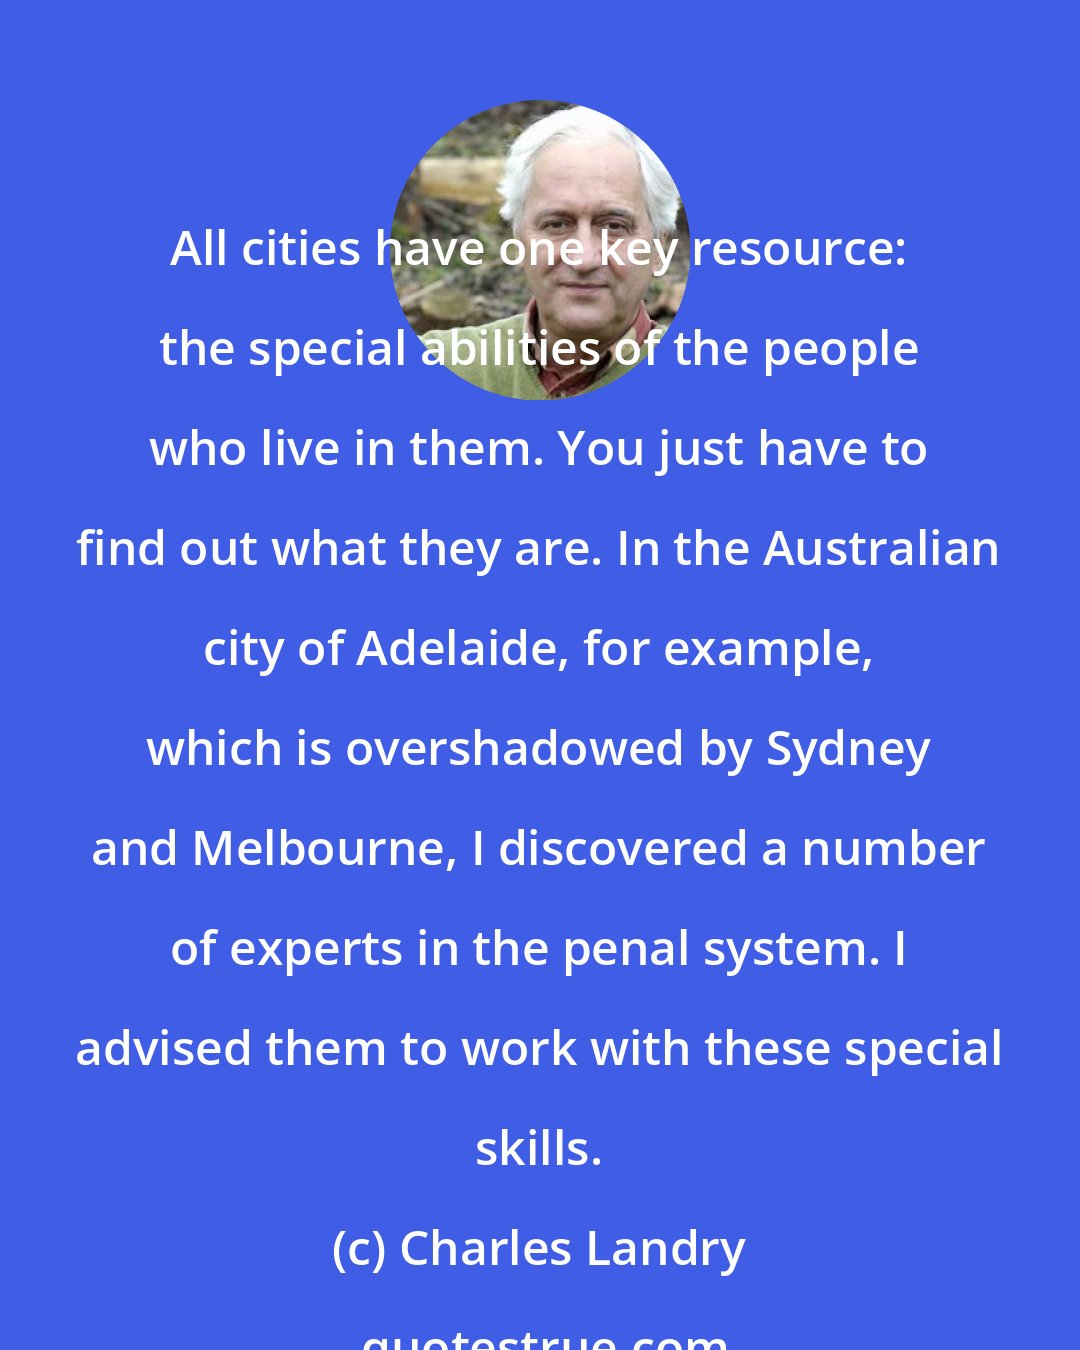 Charles Landry: All cities have one key resource: the special abilities of the people who live in them. You just have to find out what they are. In the Australian city of Adelaide, for example, which is overshadowed by Sydney and Melbourne, I discovered a number of experts in the penal system. I advised them to work with these special skills.